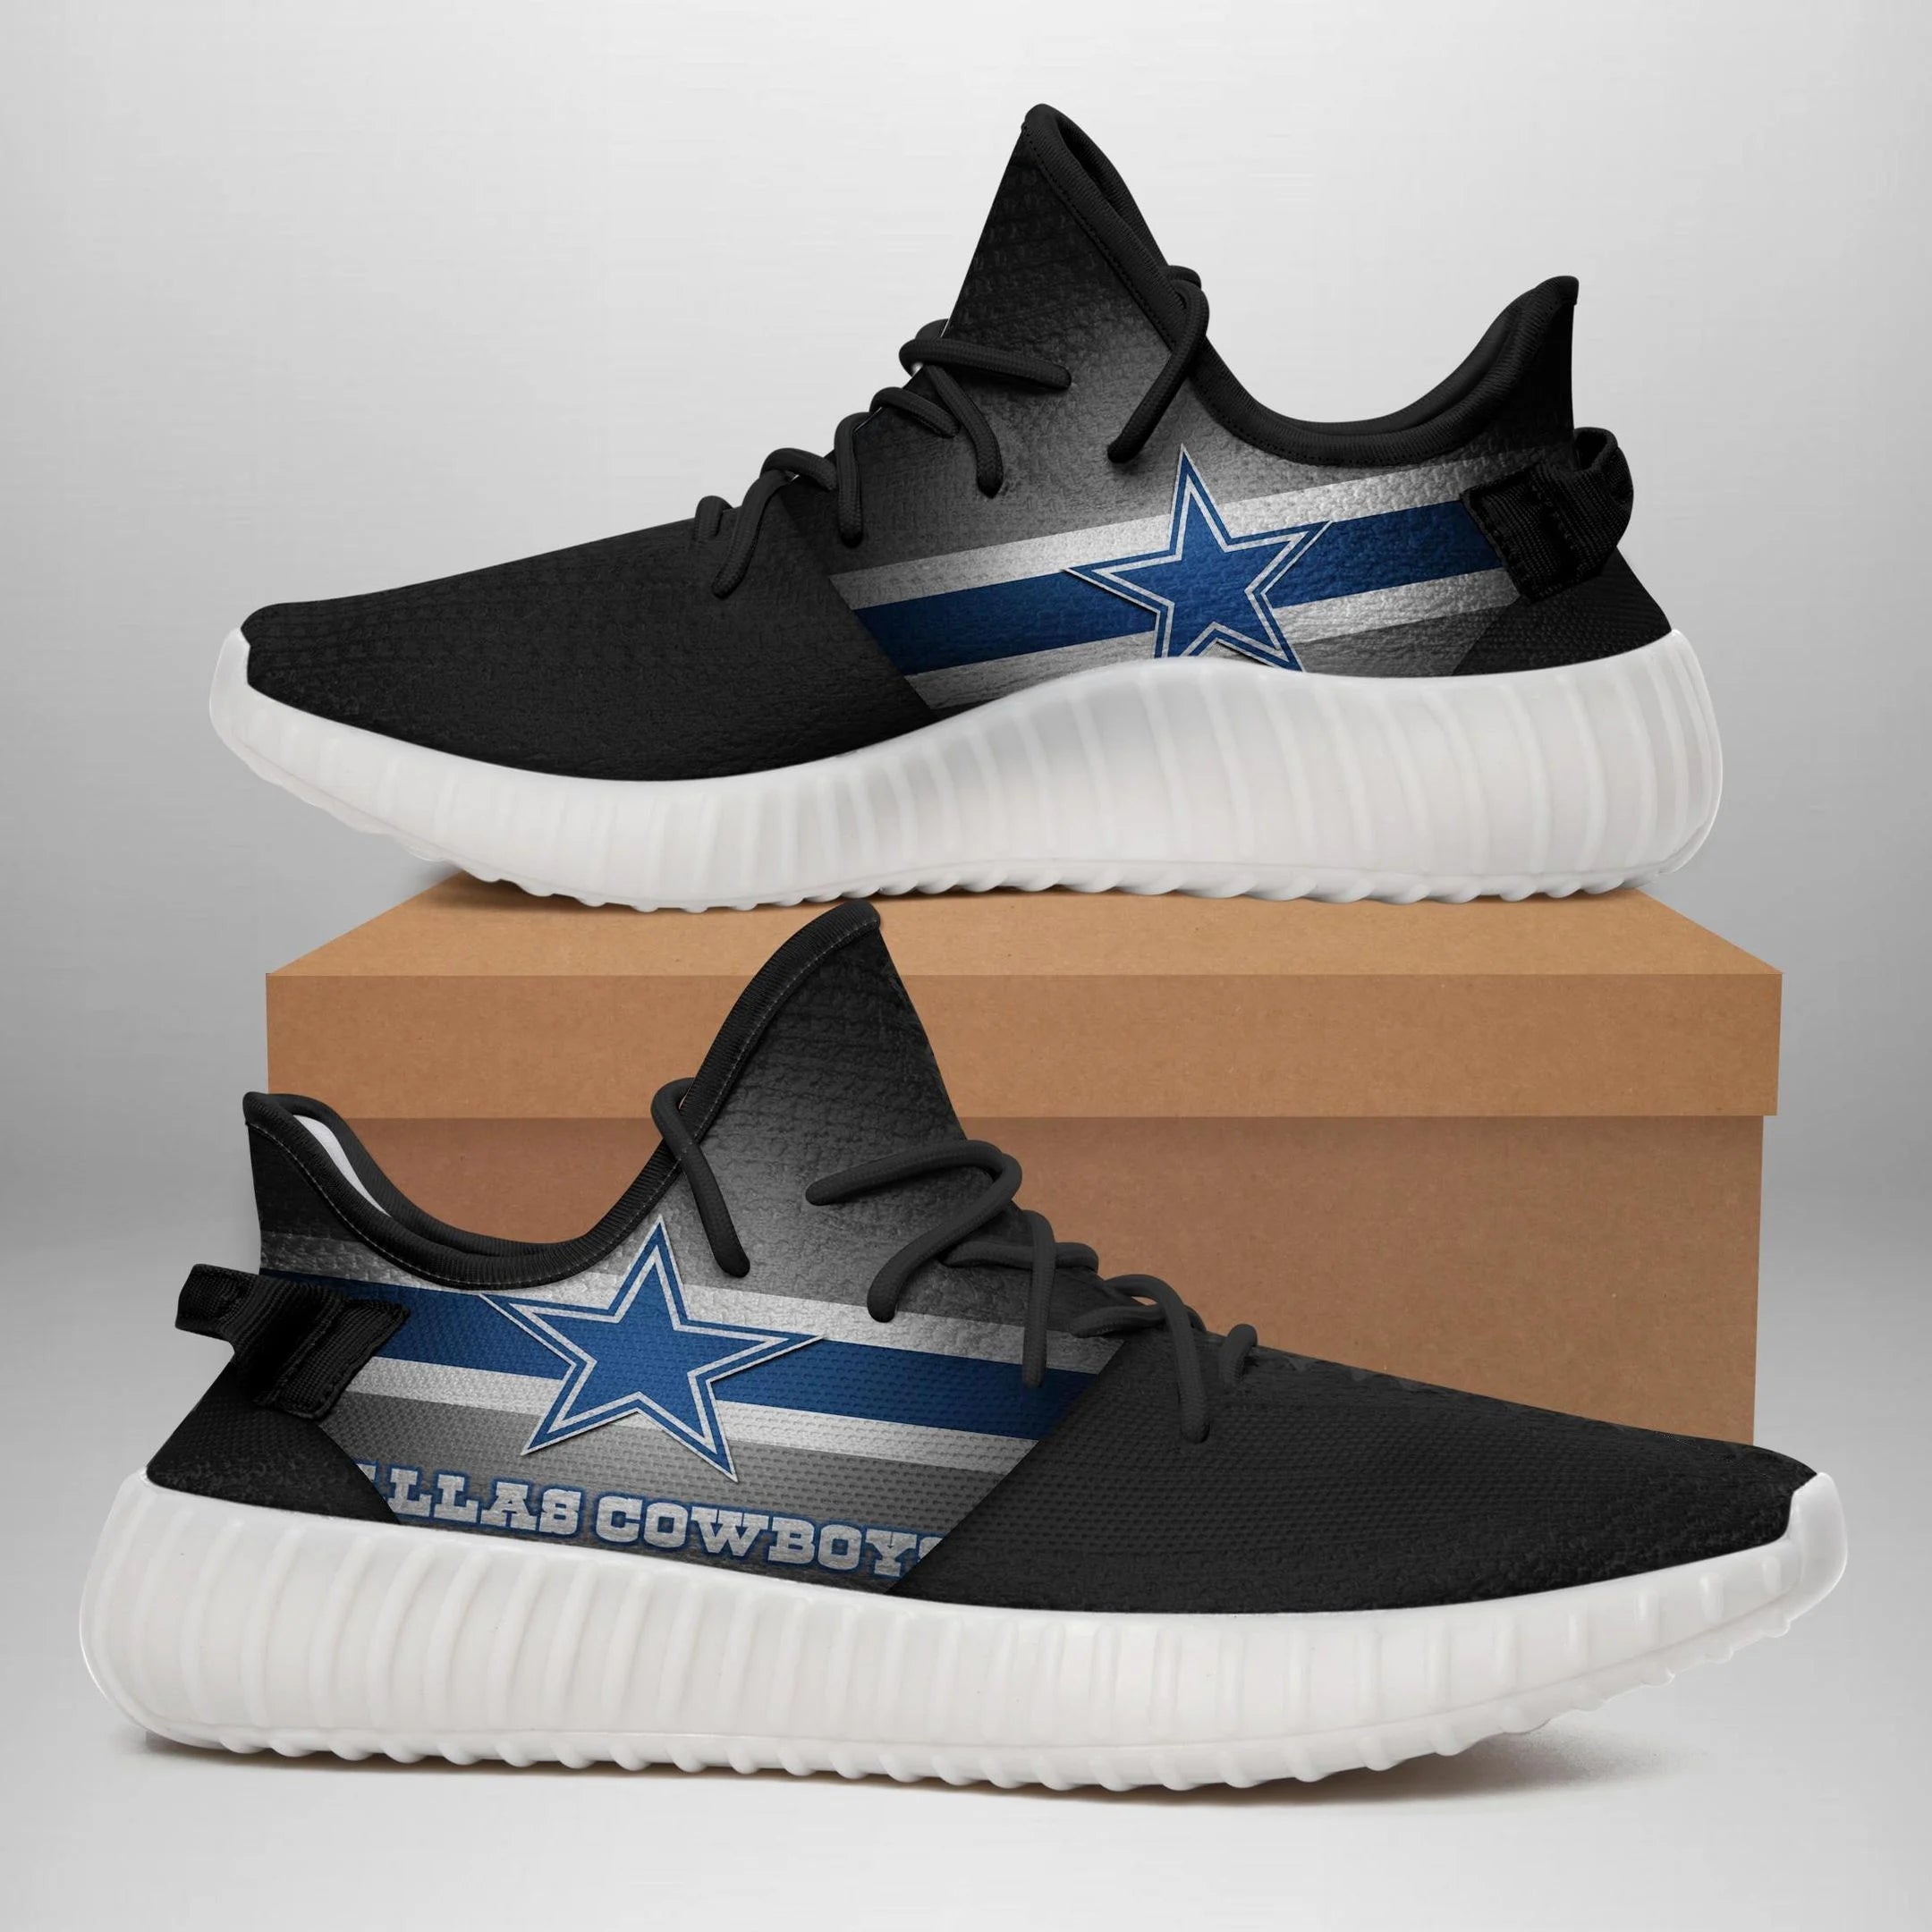 Buy DALLAS COWBOYS YEEZY SHOES Yeezy Boost 350 V2 Top Trending Custom Shoes Gift